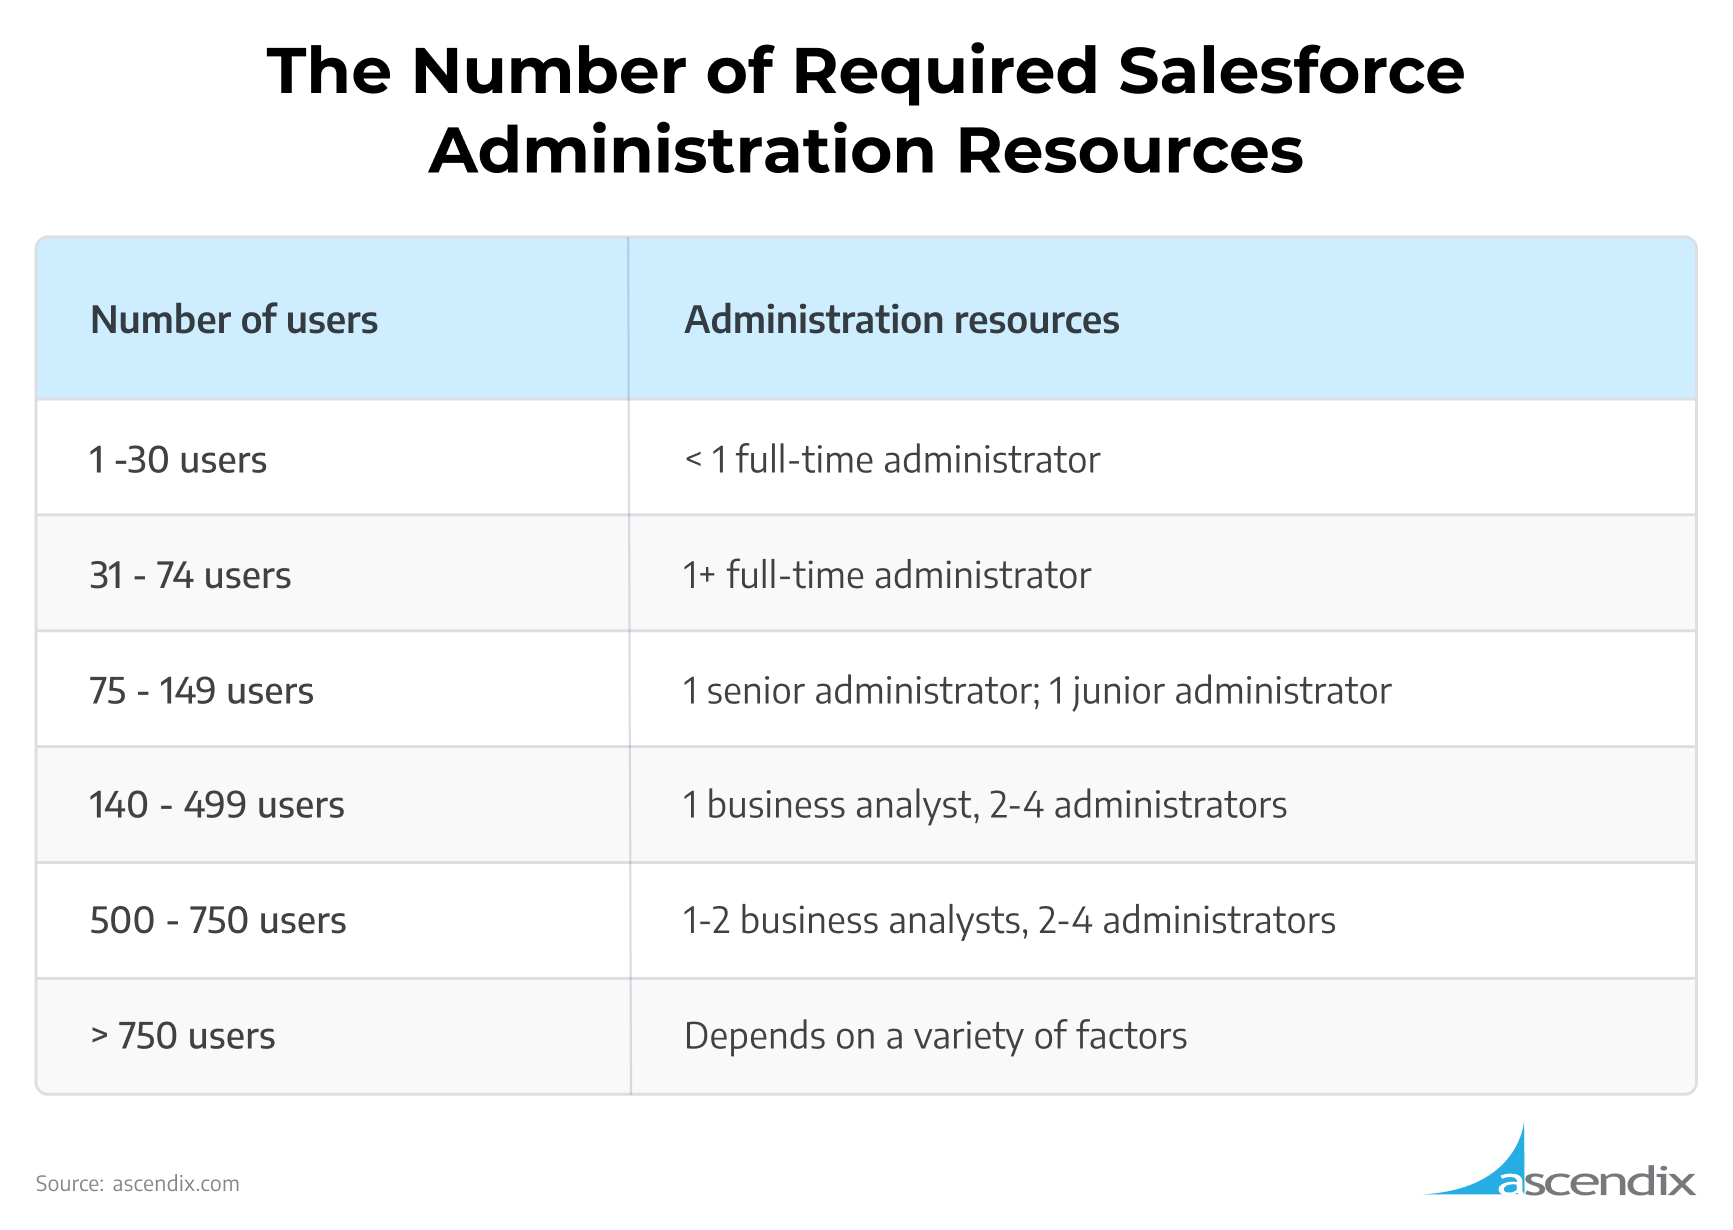 The Number of Required Salesforce Administration Resources | Ascendix